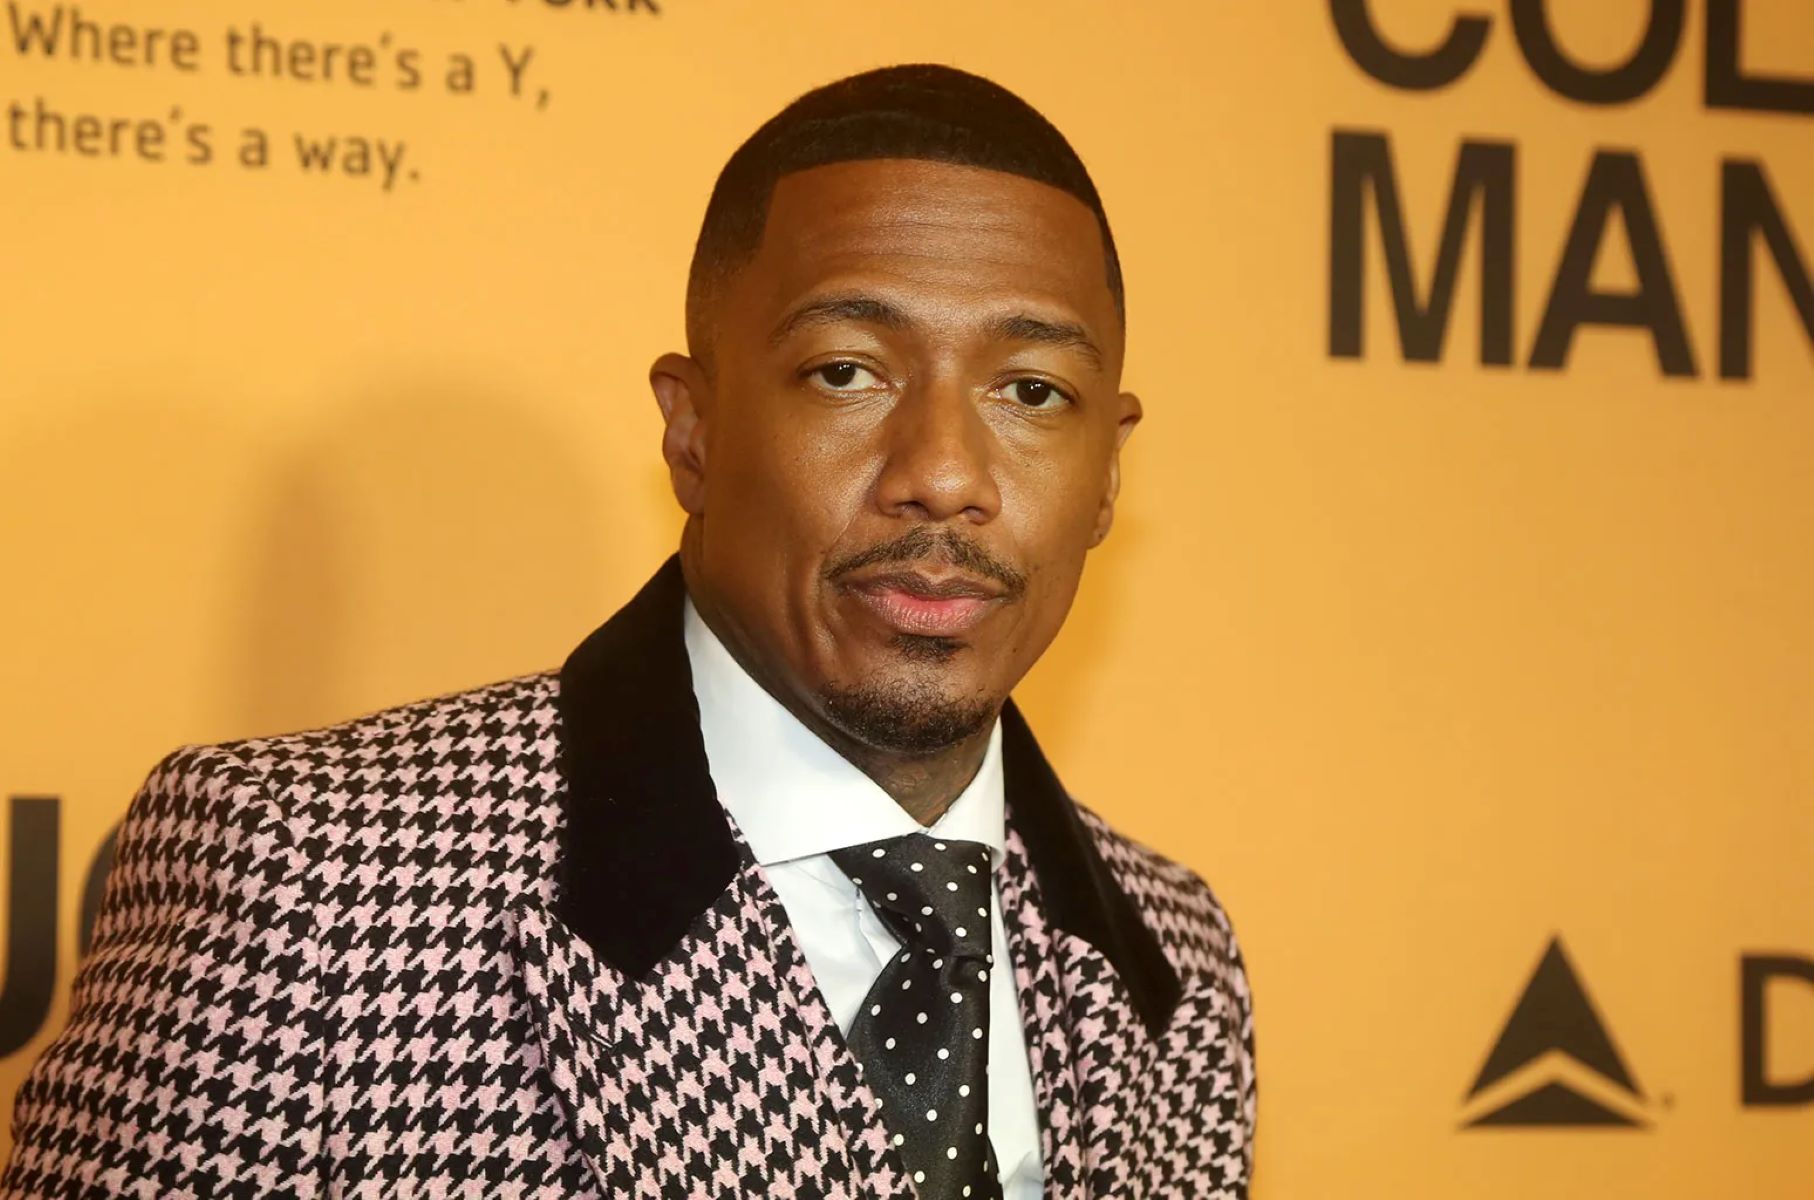 Nick Cannon Raises Concerns About Nicki Minaj’s Husband, While She Promises To Spill The Tea On Radio Show